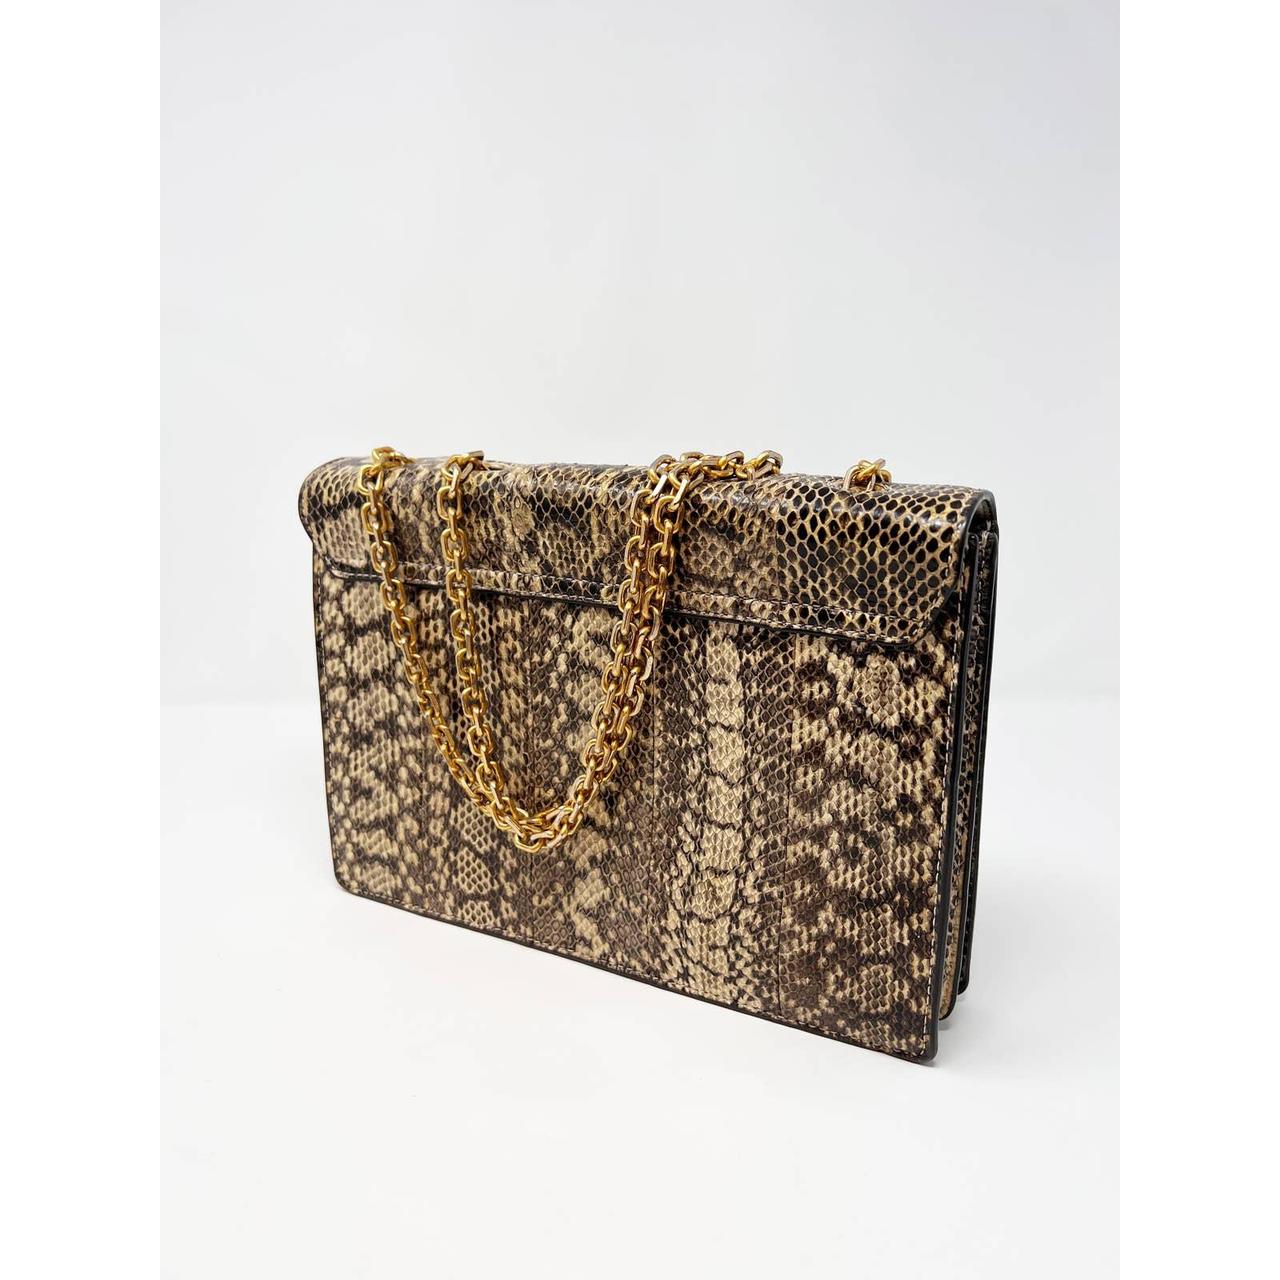 Tory Burch Lee Radziwill Snakeskin Print Small Leather Bag - ShopStyle